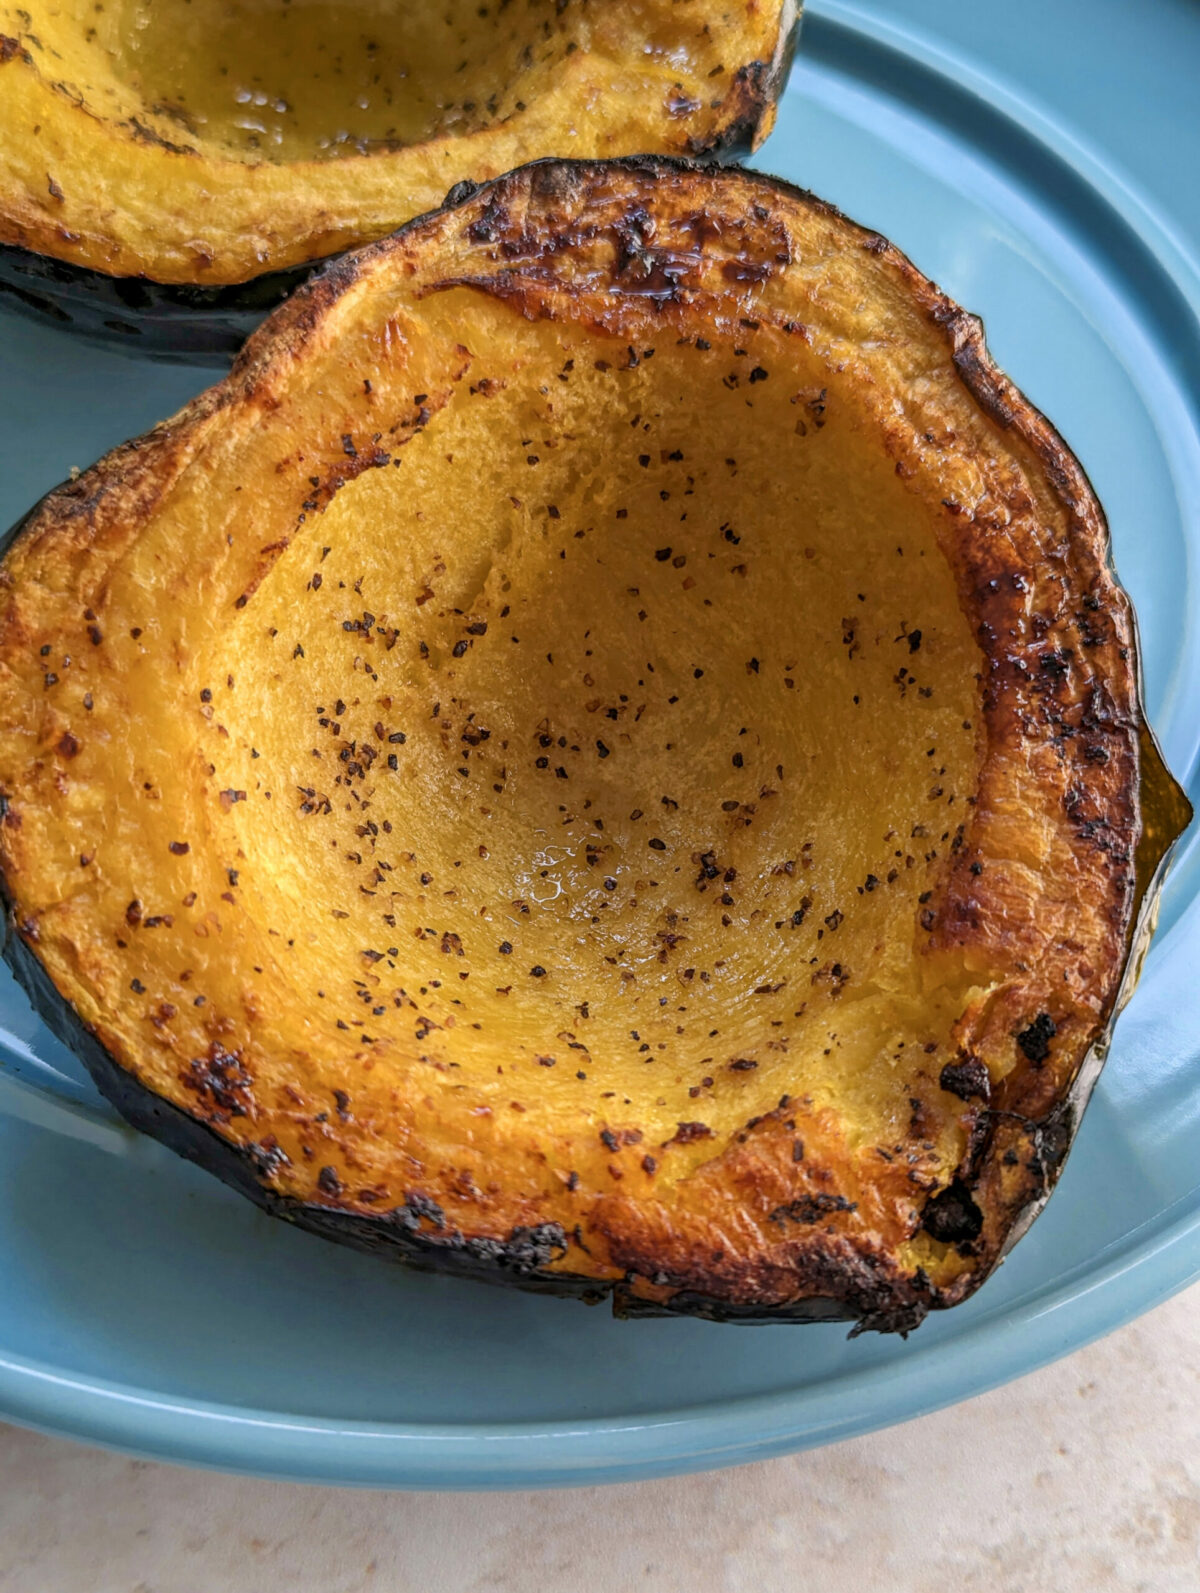 Cooked acorn squash on a plate.